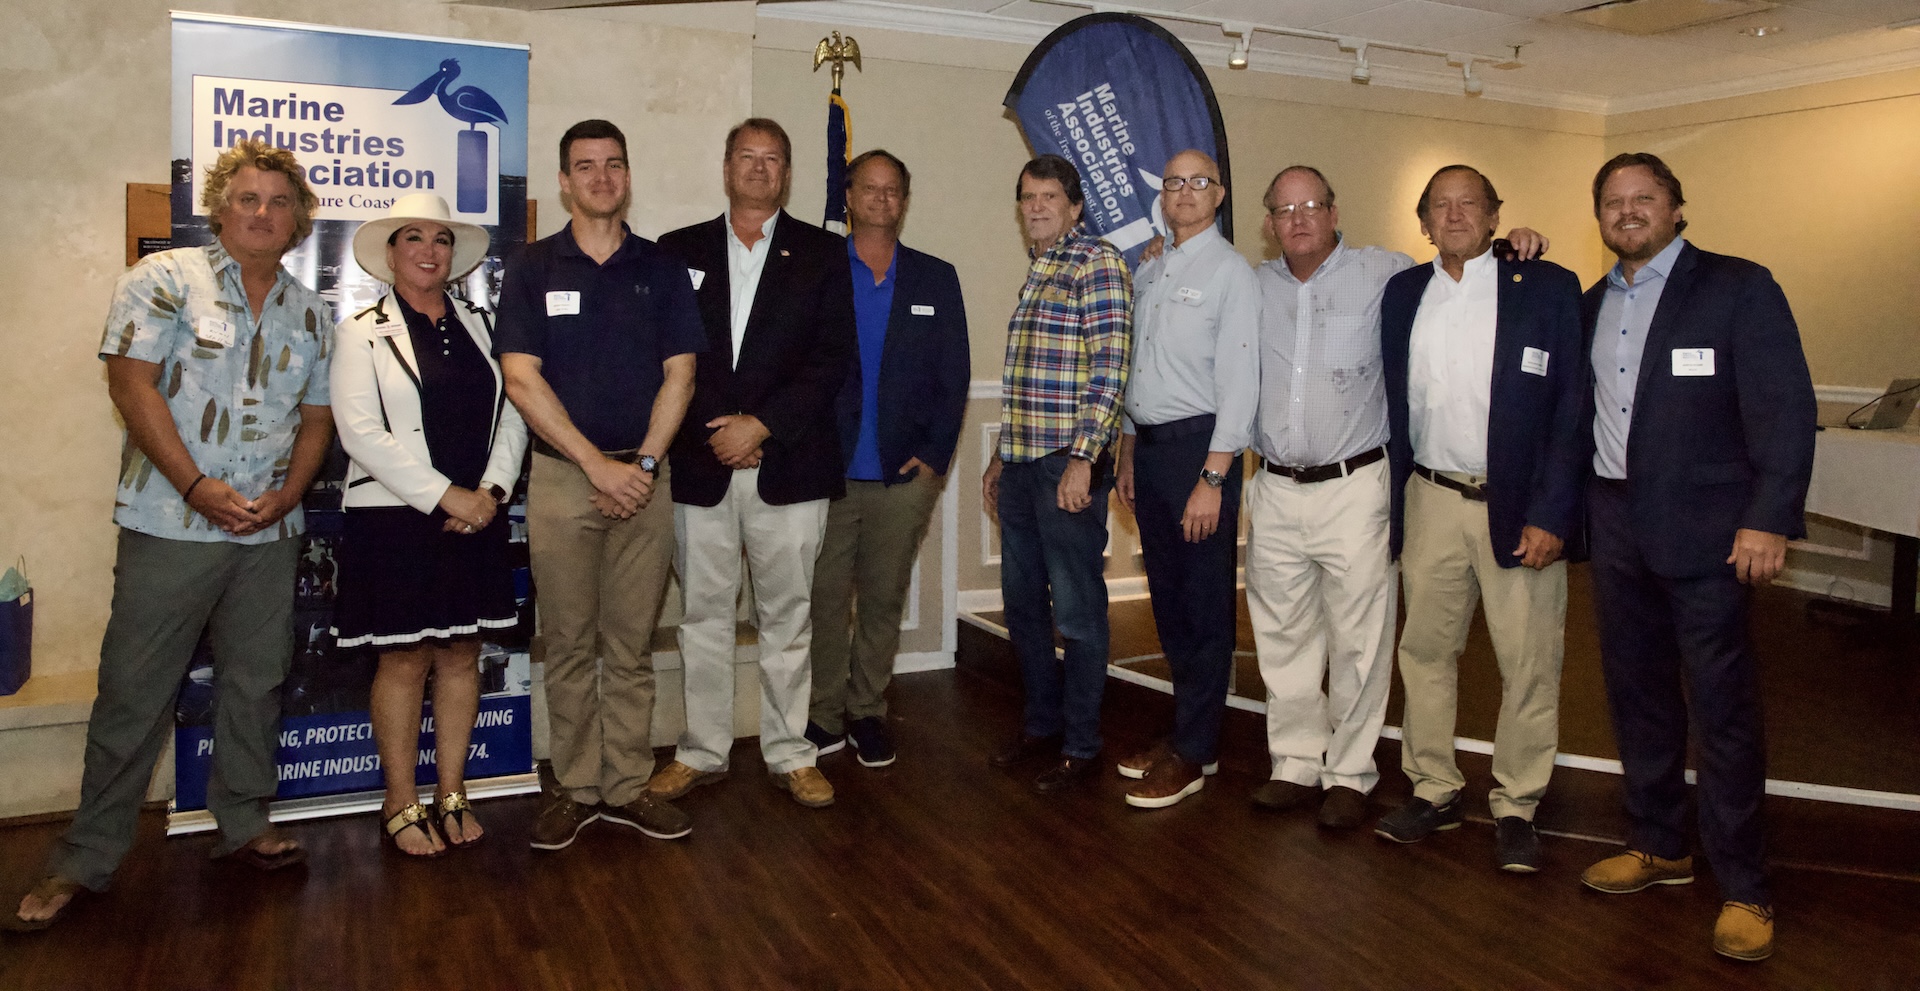 MIATC Welcomes New Board Members, Officers During Annual Meeting